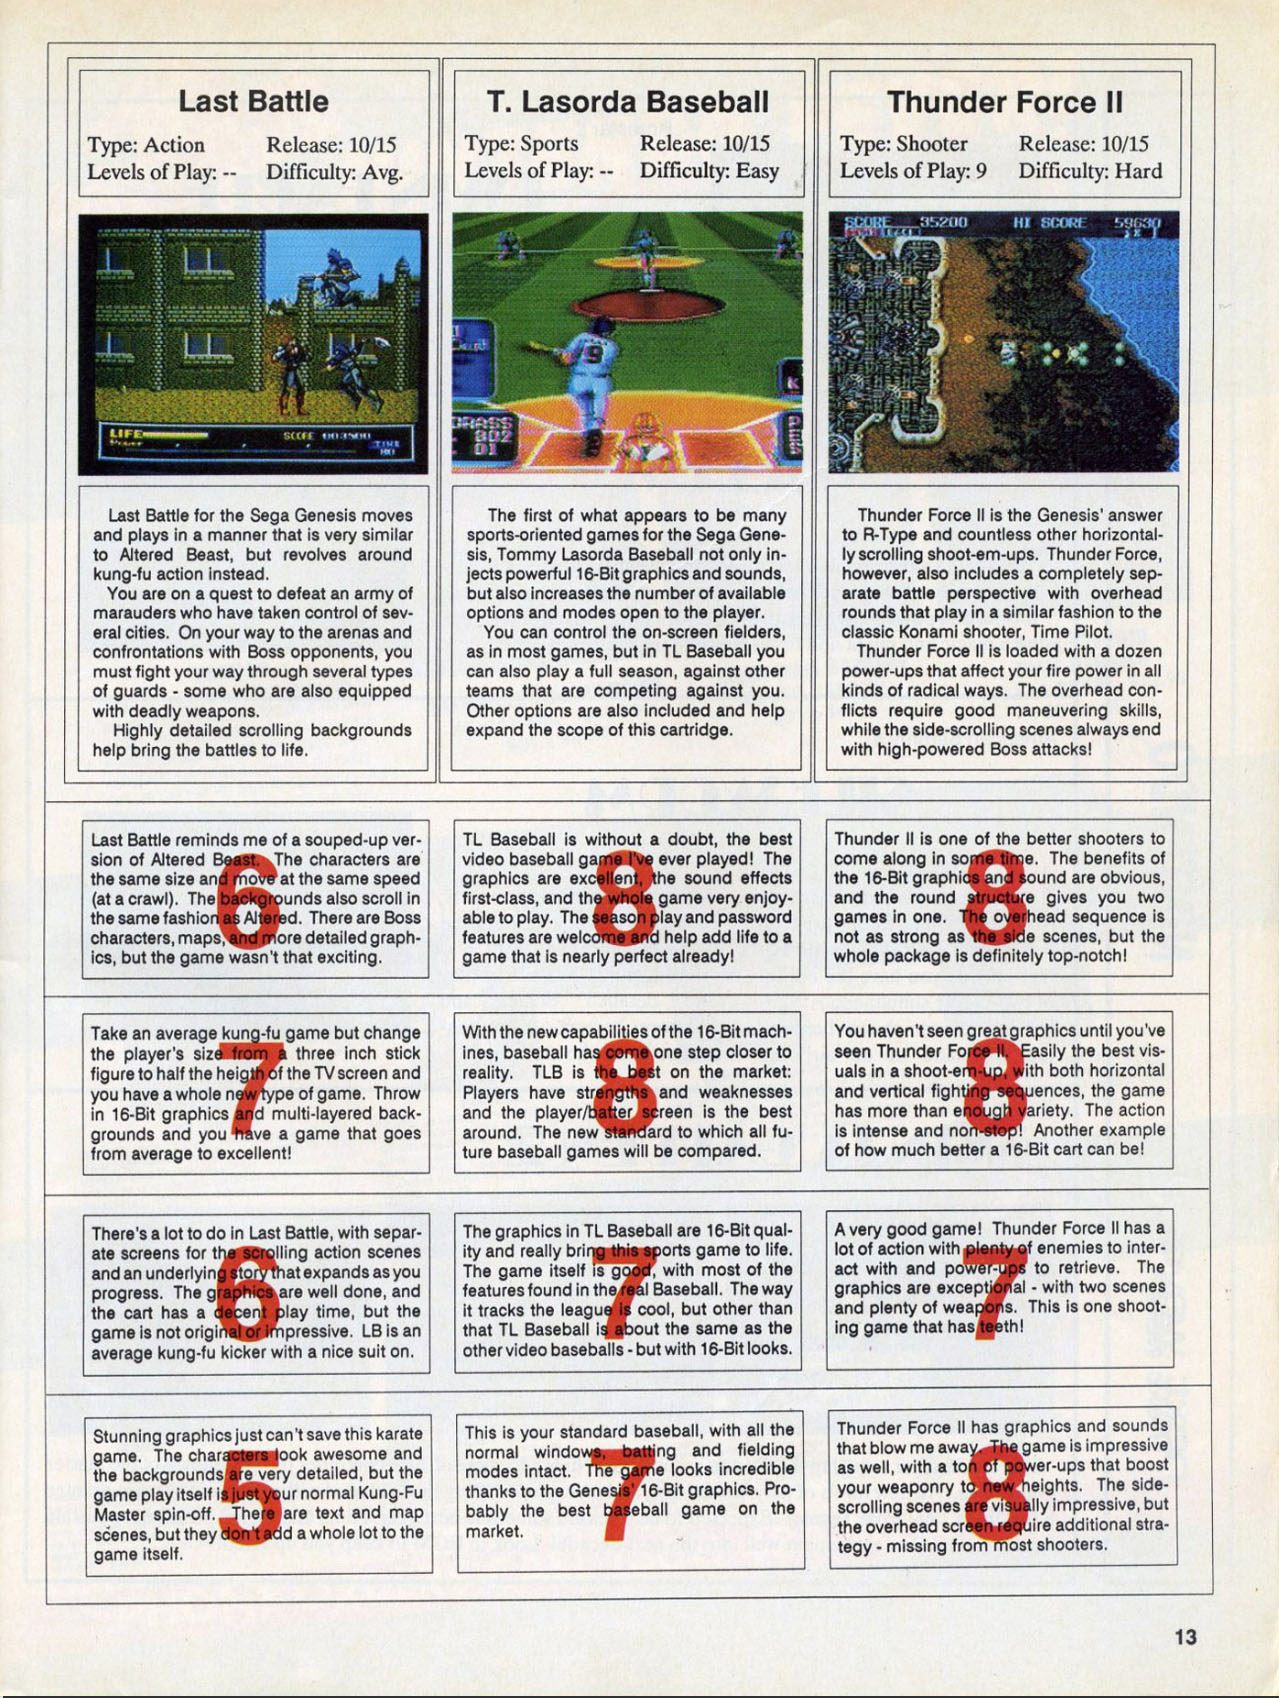 Tommy Lasorda Baseball Review, Electronic Gaming Monthly November 1989 page 13